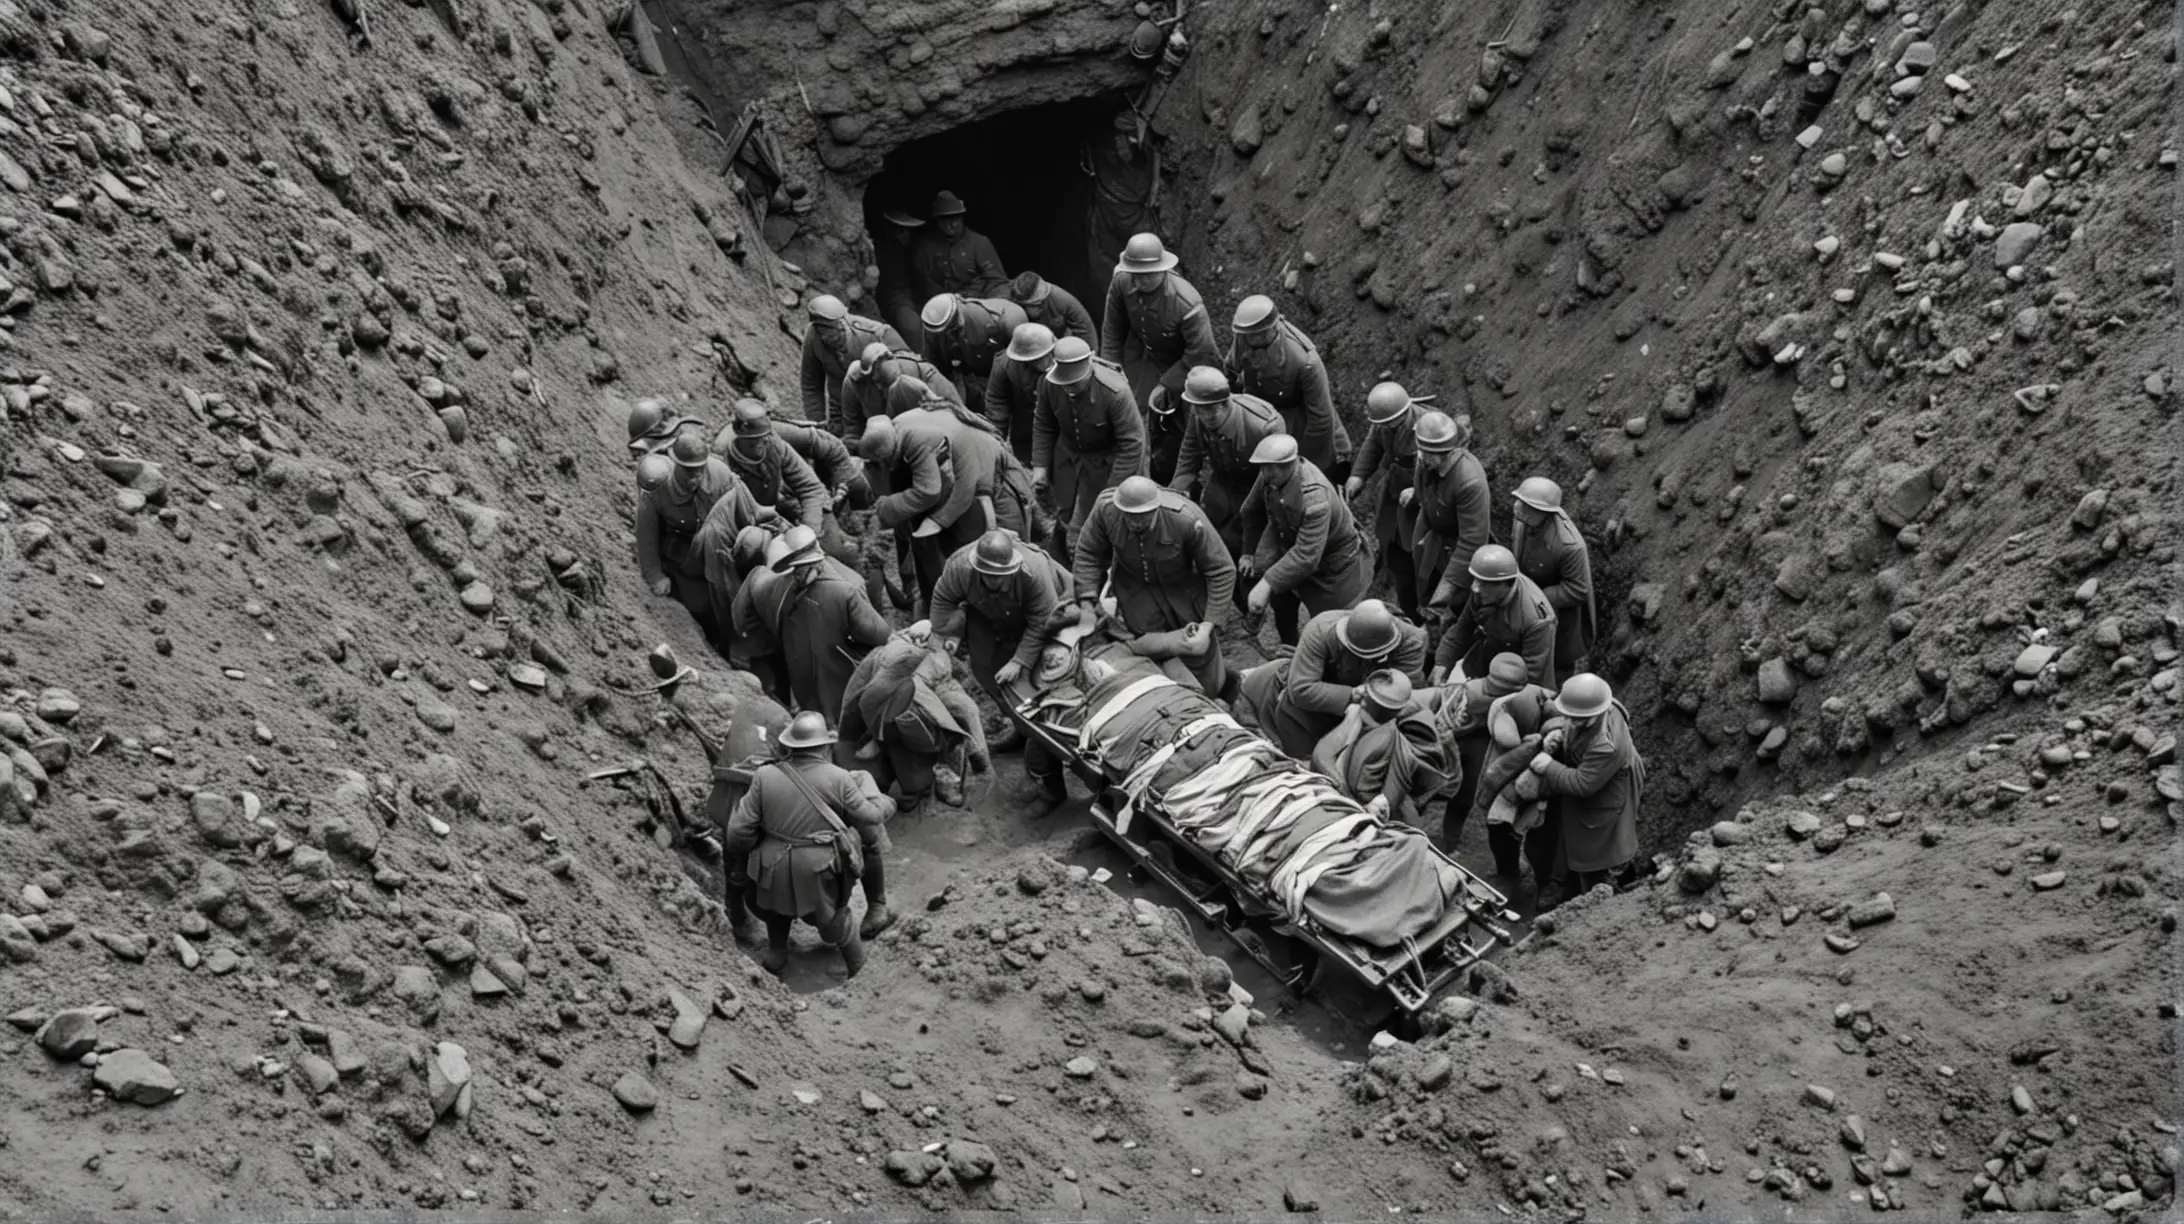 World War I Ambulance Workers Evacuating Wounded Soldiers in Trench